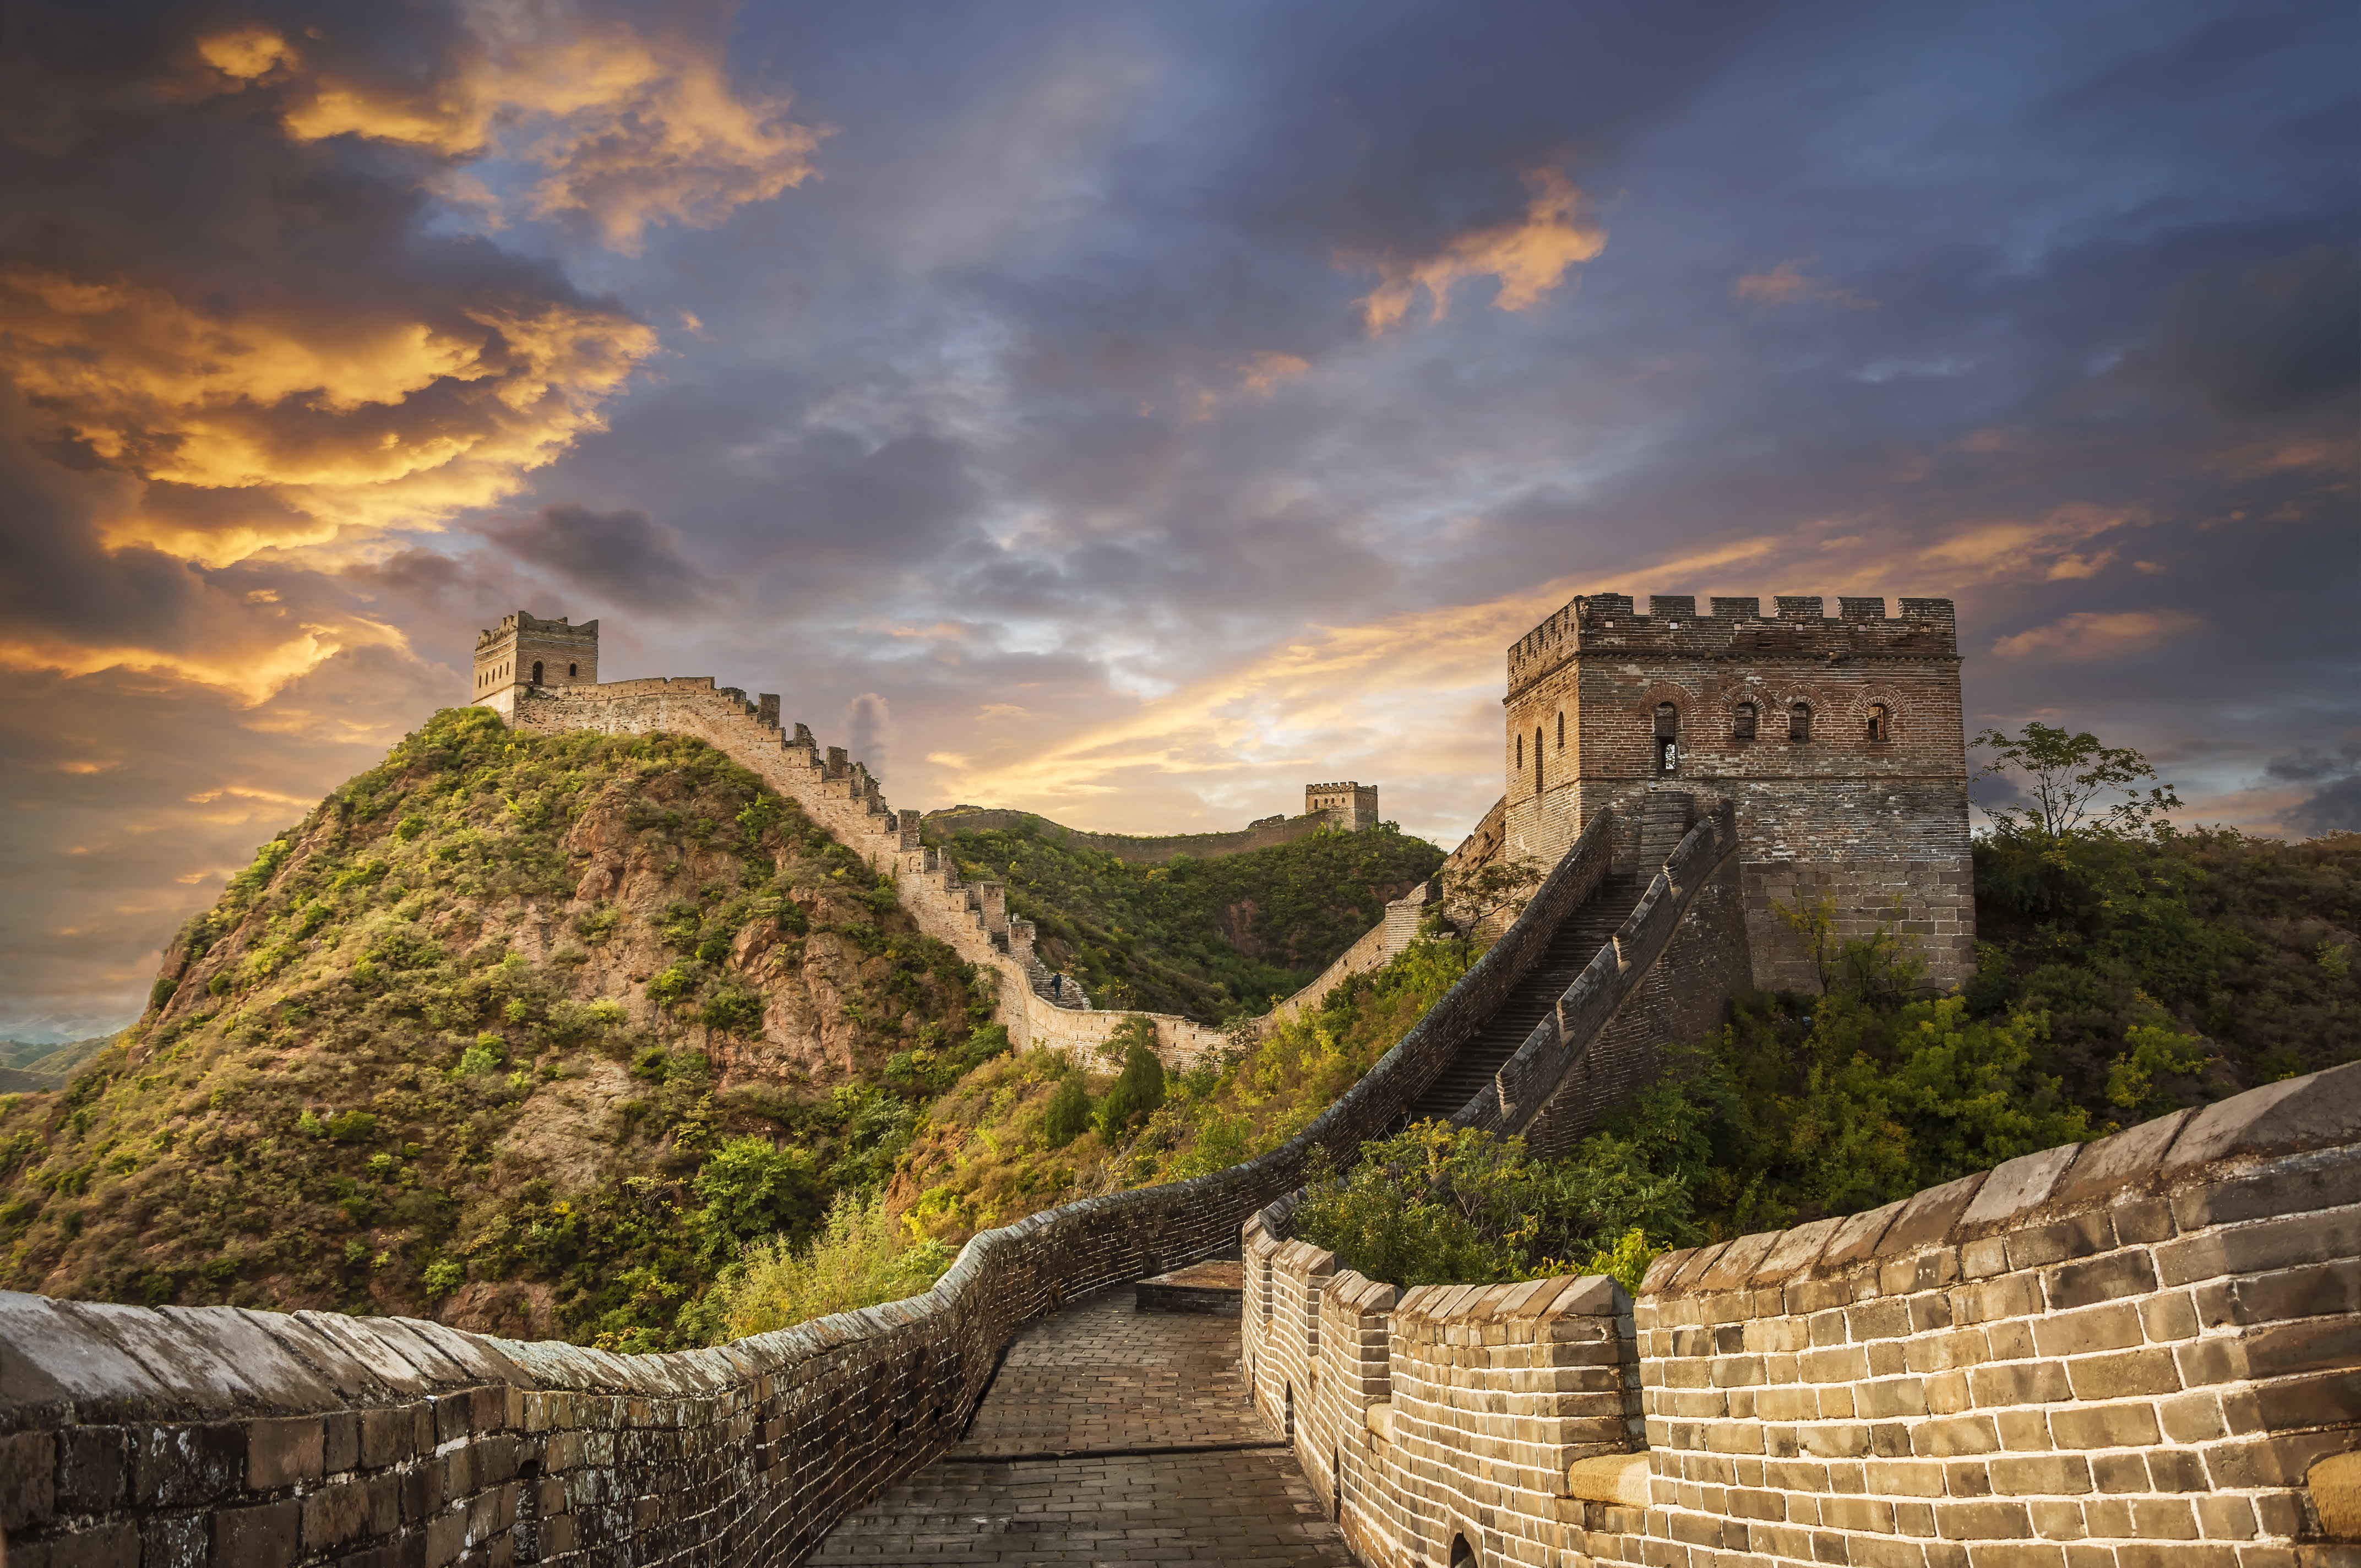 Touring the Great Wall of China: Day trip ideas